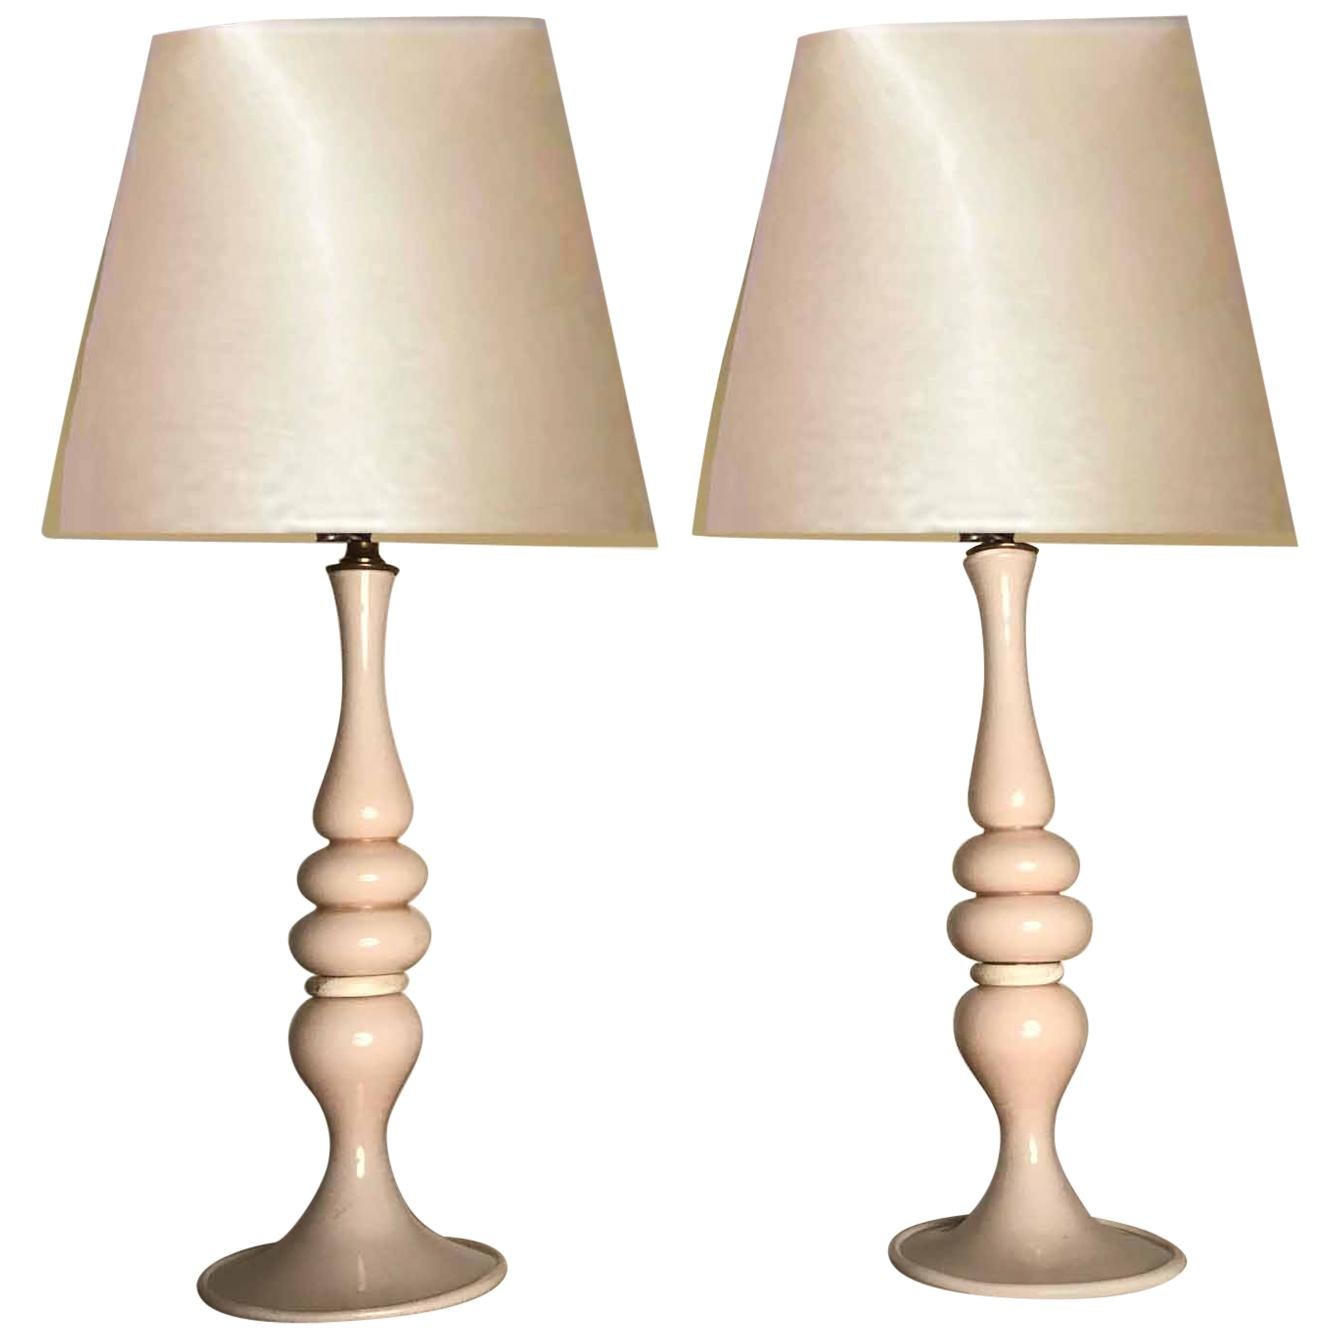 Pair of Mid-Century Modern Murano Glass Table Lamps For Sale